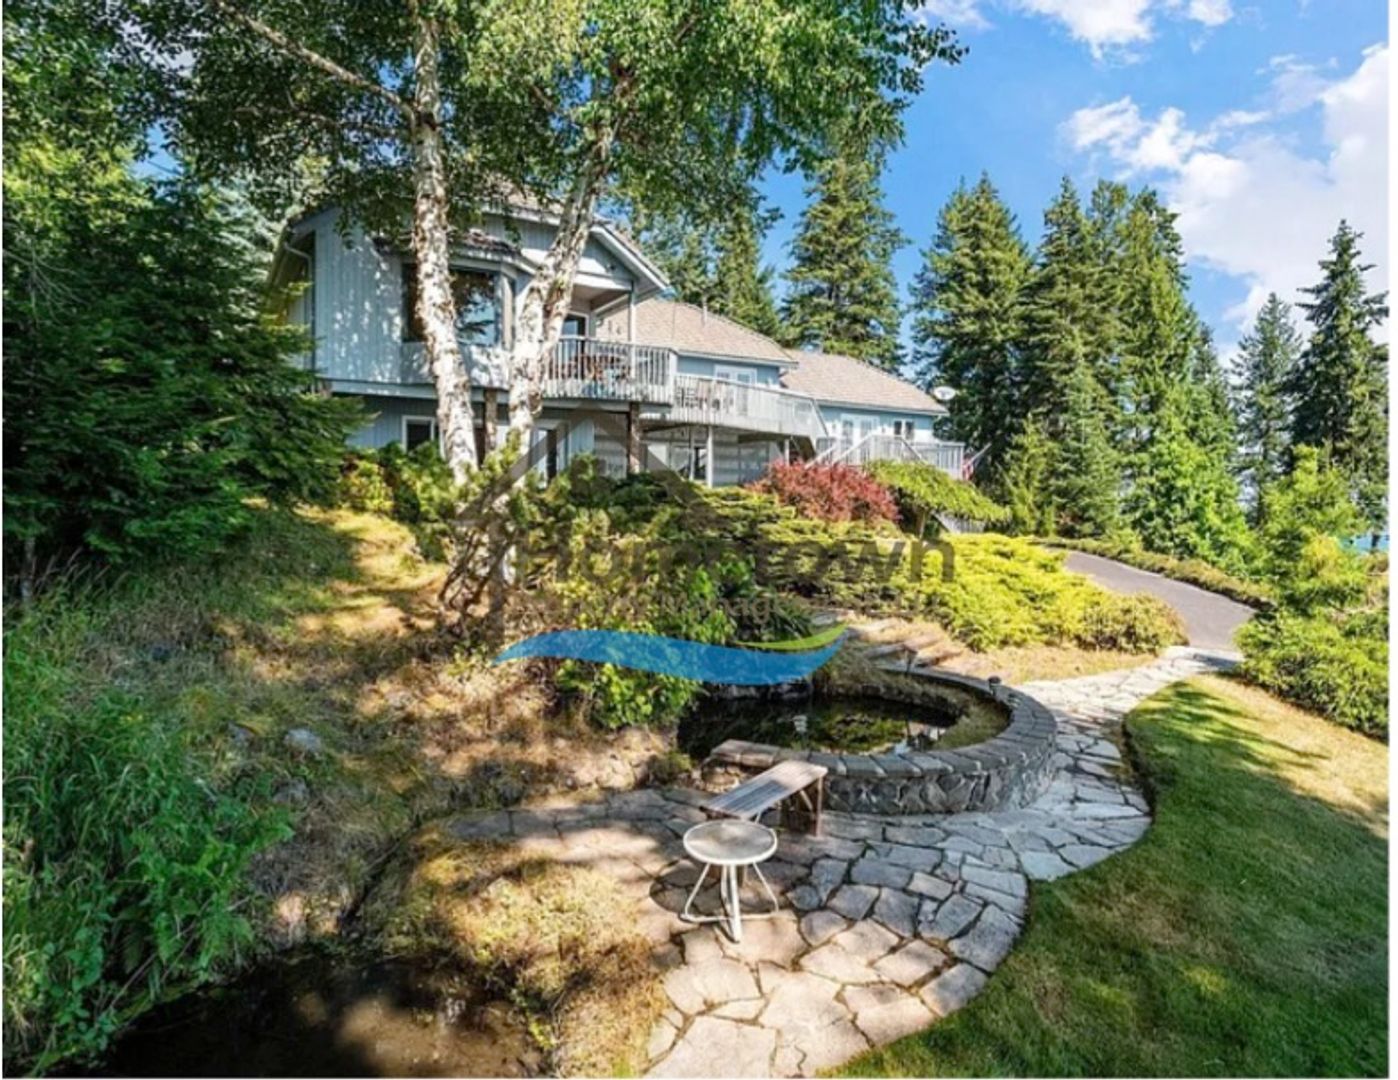 4 Bedroom 3 Bath Lake View Home with Attached 2 Car Garage Available in Coeur d'Alene!